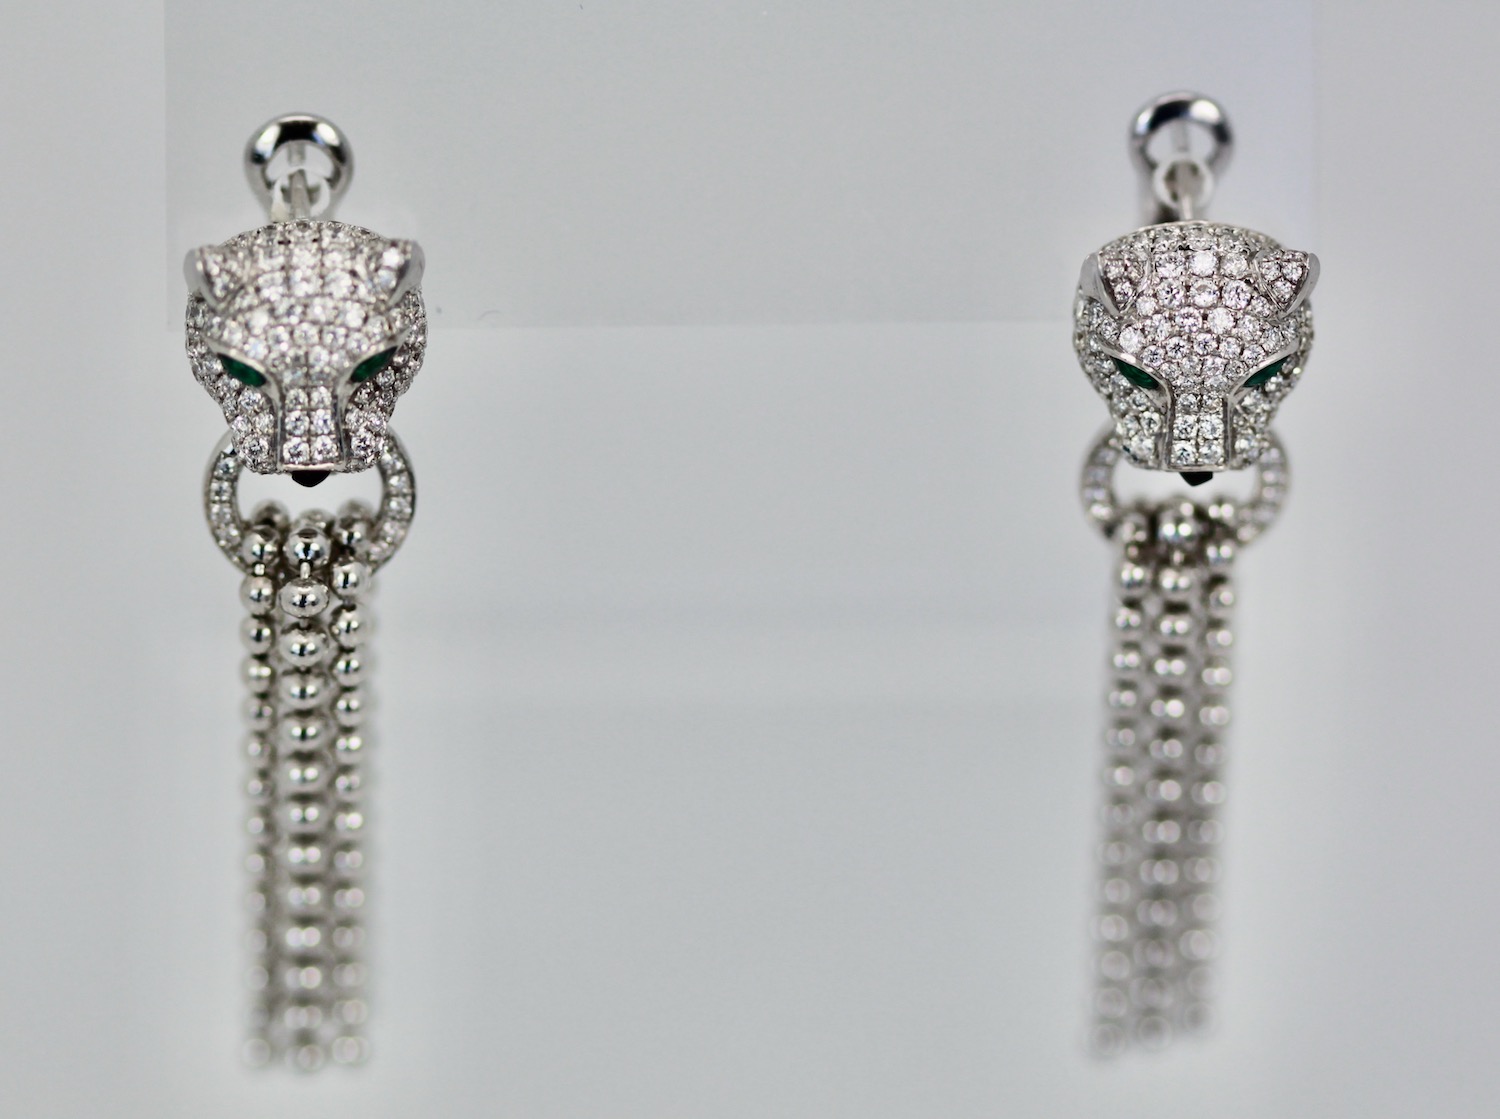 Cartier Panther Diamond Earrings with Tassels – set